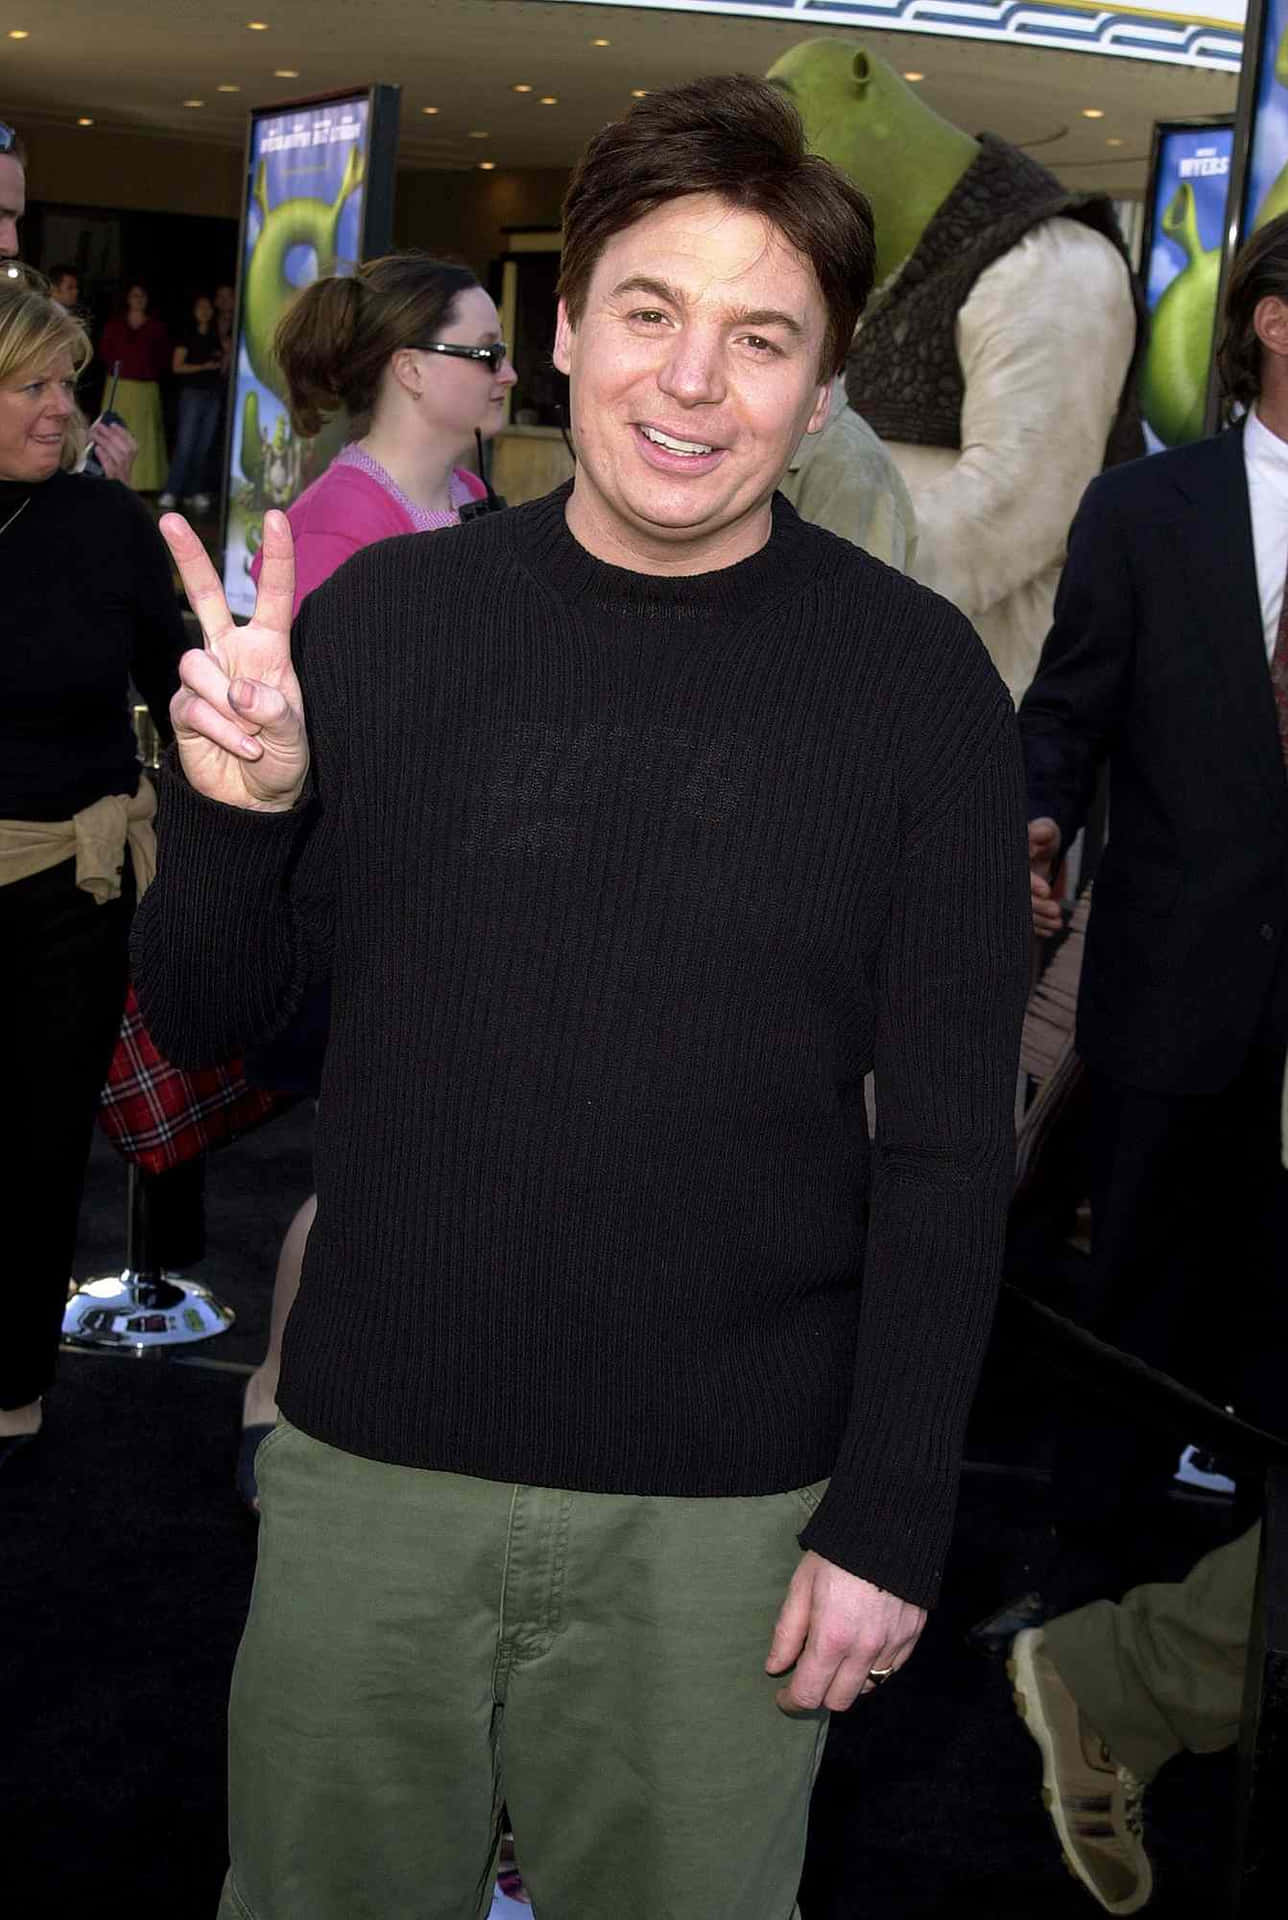 Mike Myers striking a charismatic pose Wallpaper